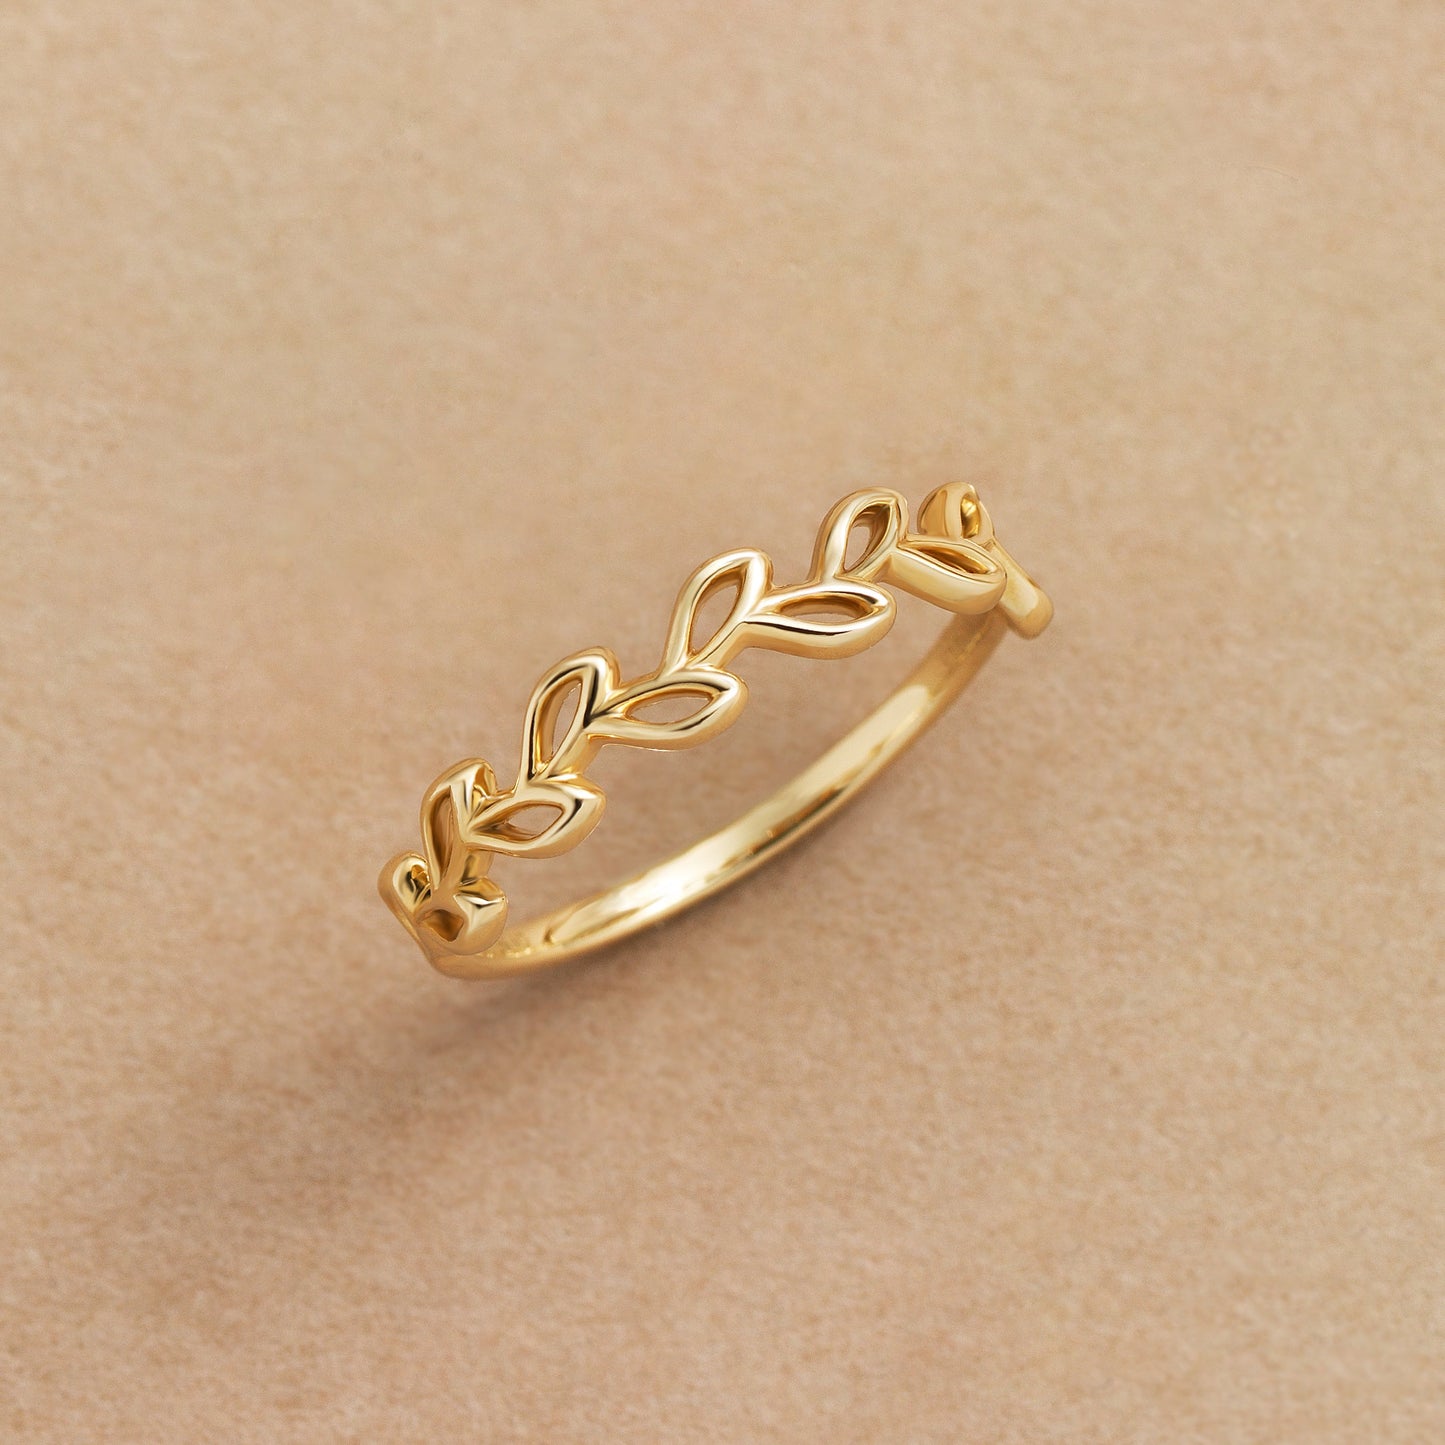 10K Yellow Gold Leaf Crown Pinky Ring - Product Image